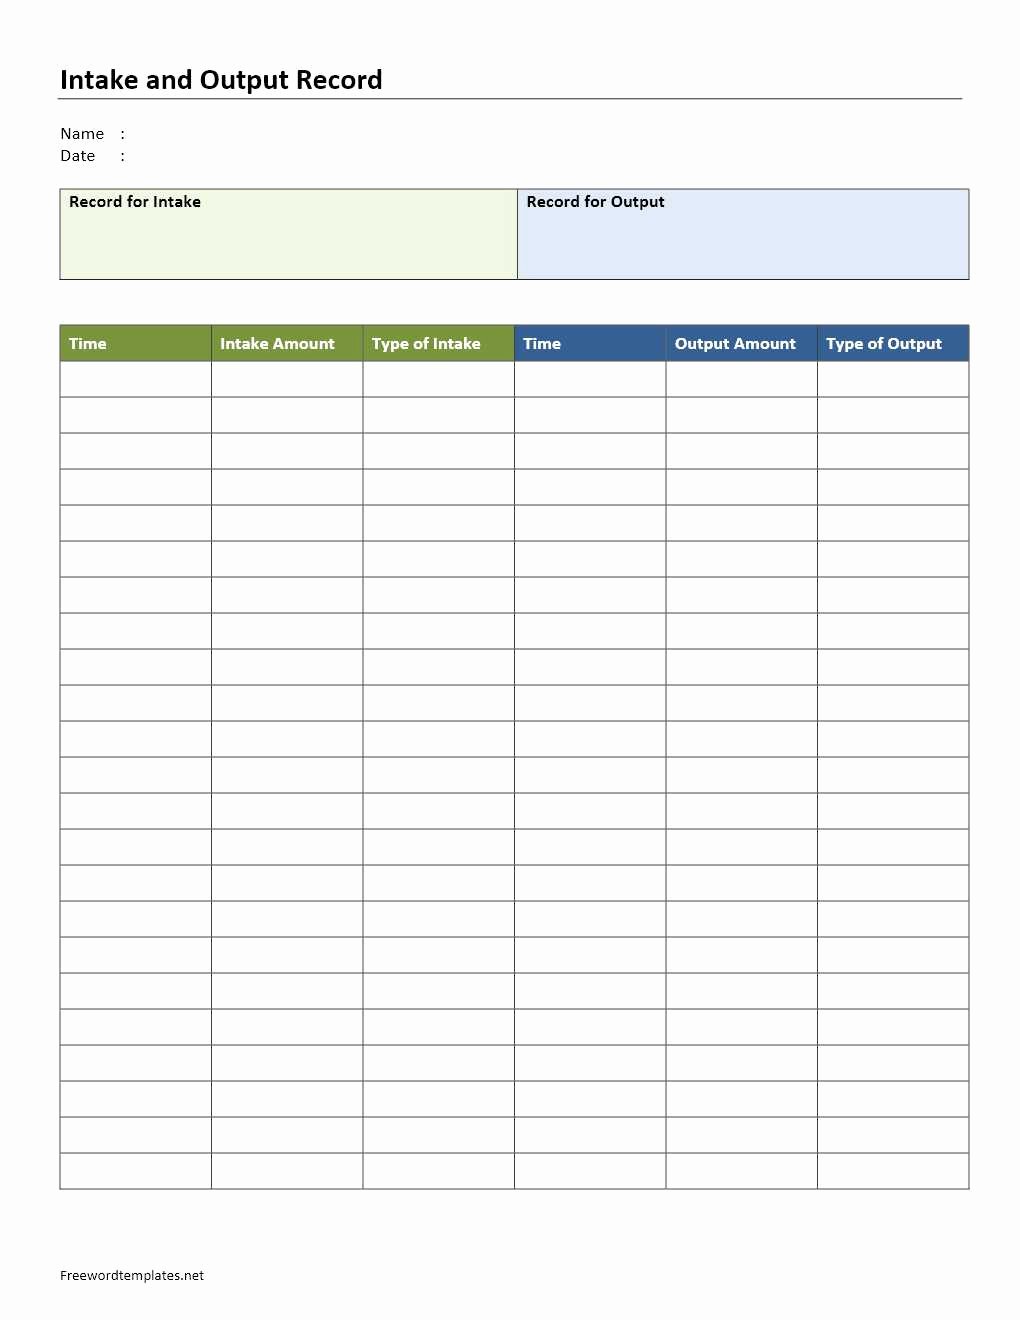 Intake form Template Word Elegant Intake and Output Record